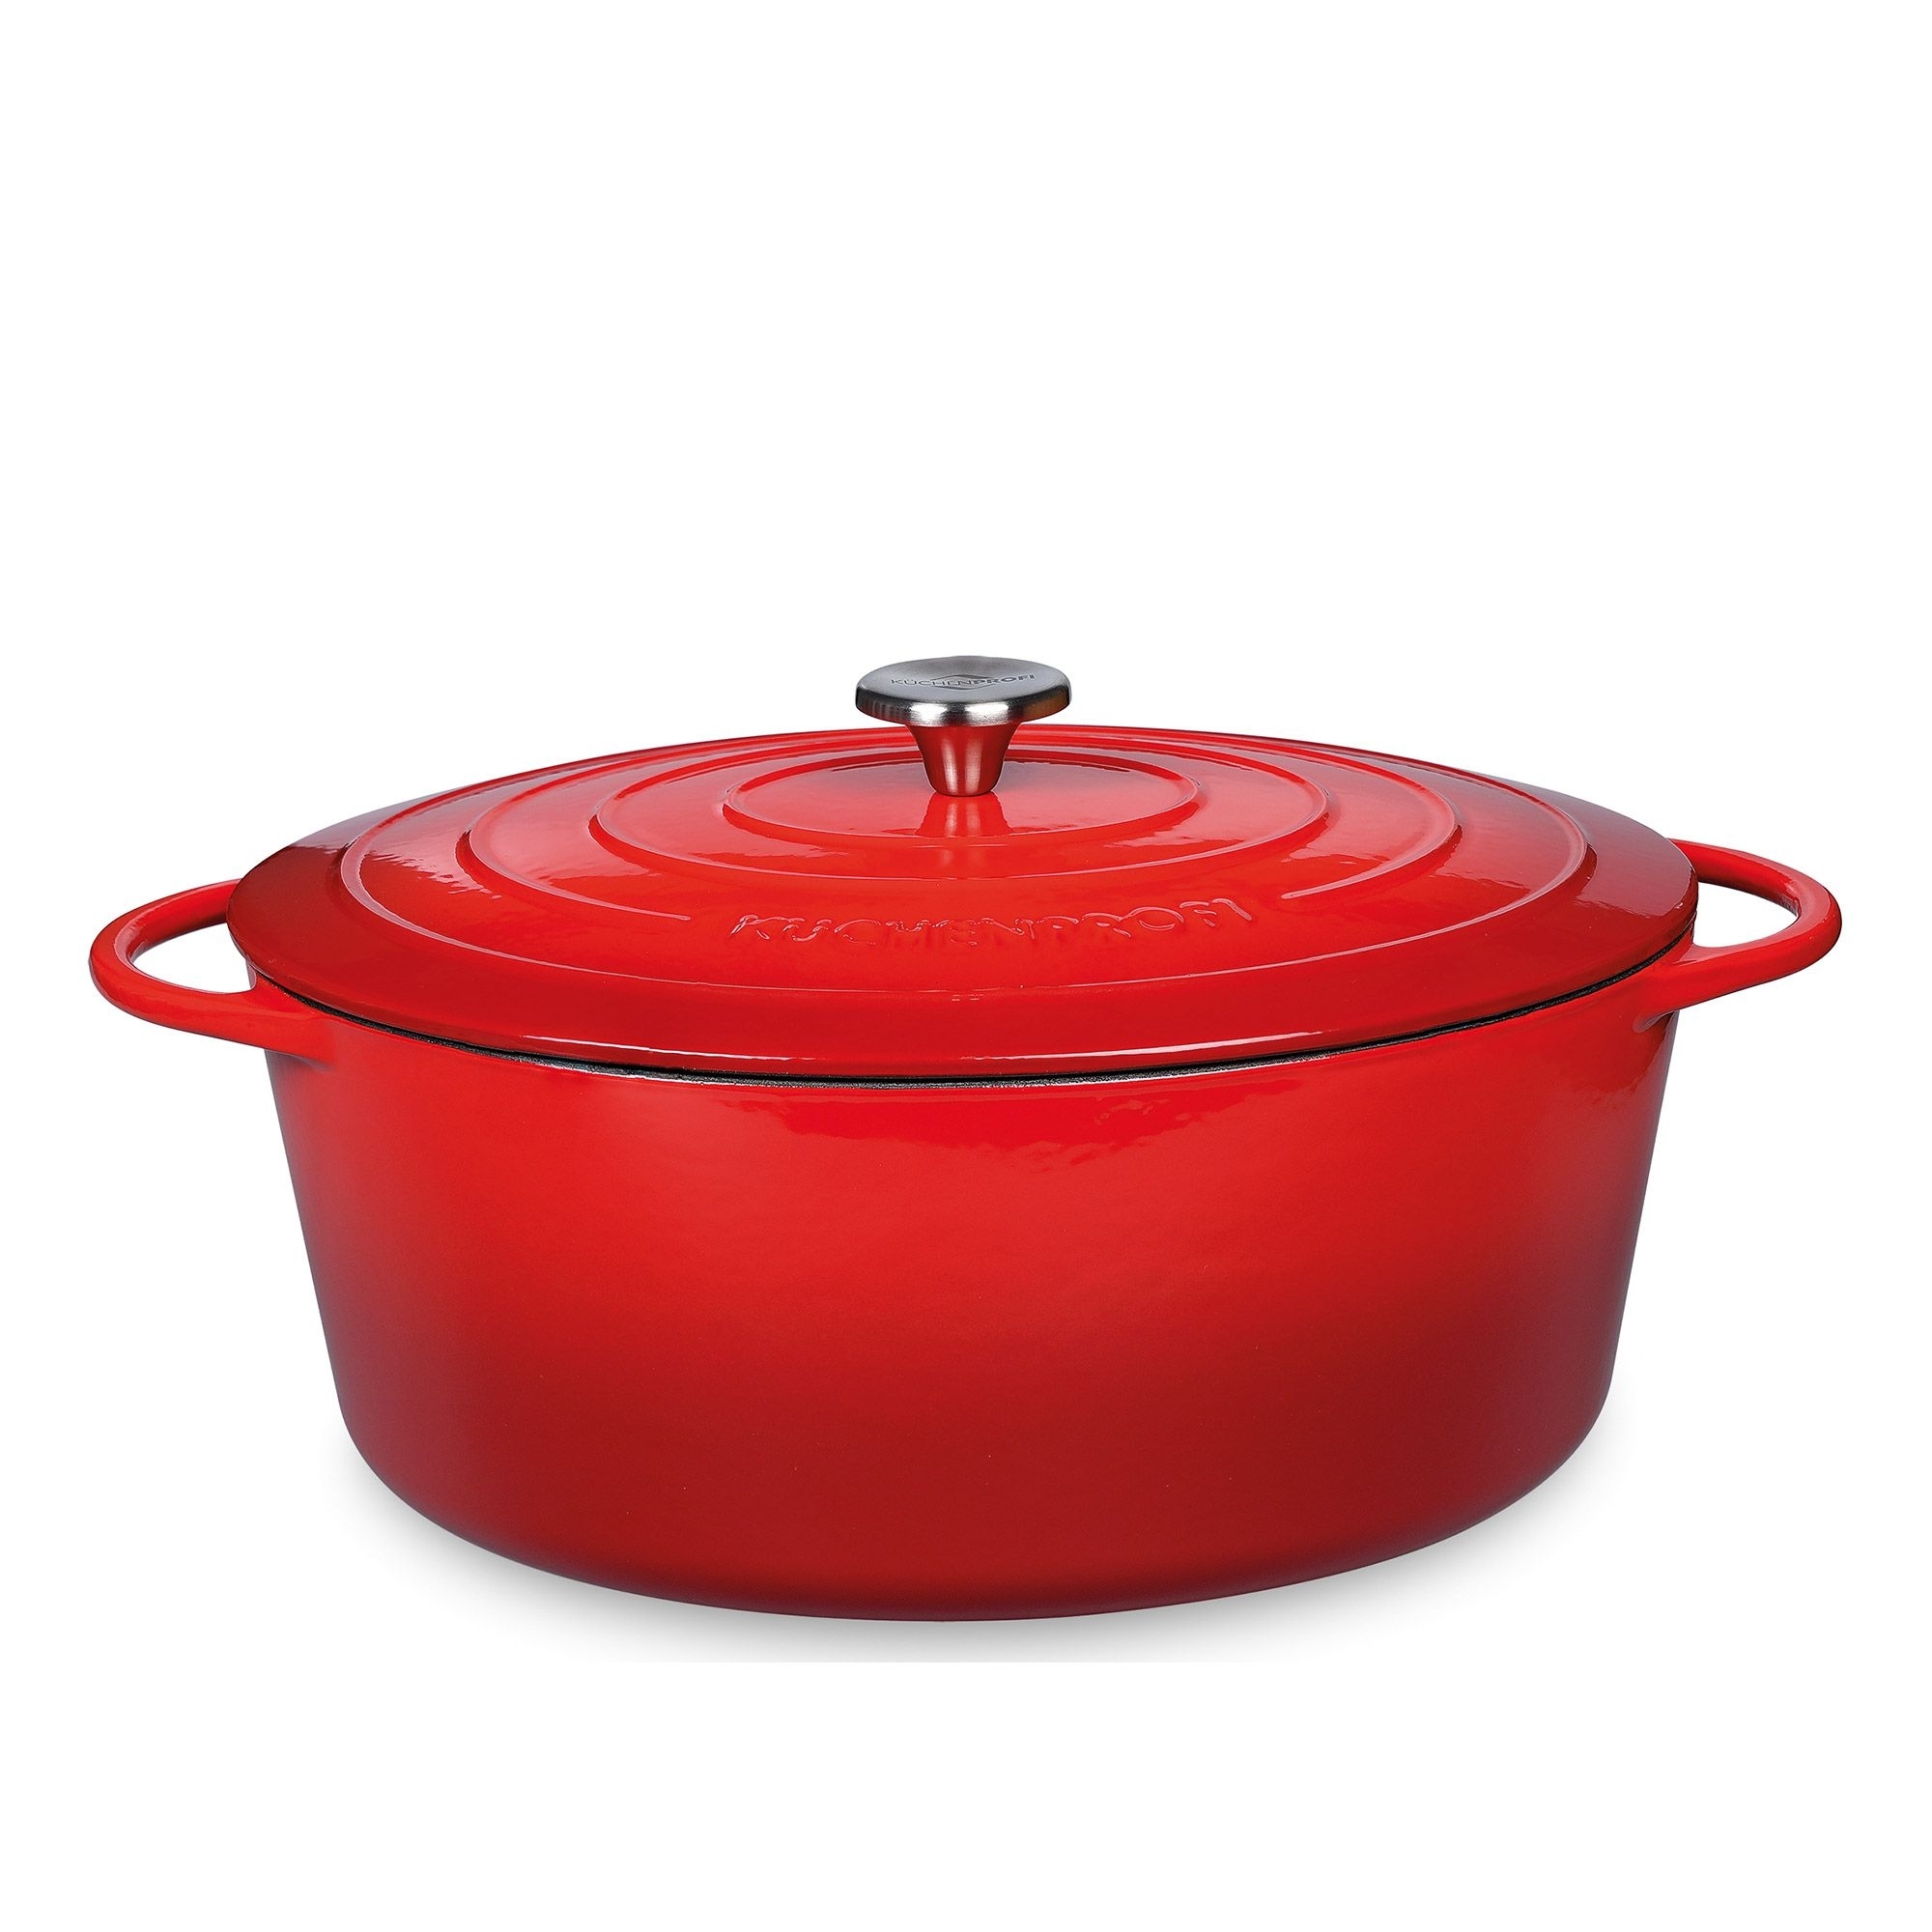 Küchenprofi - PROVENCE - oval French Oven - red - 40 cm